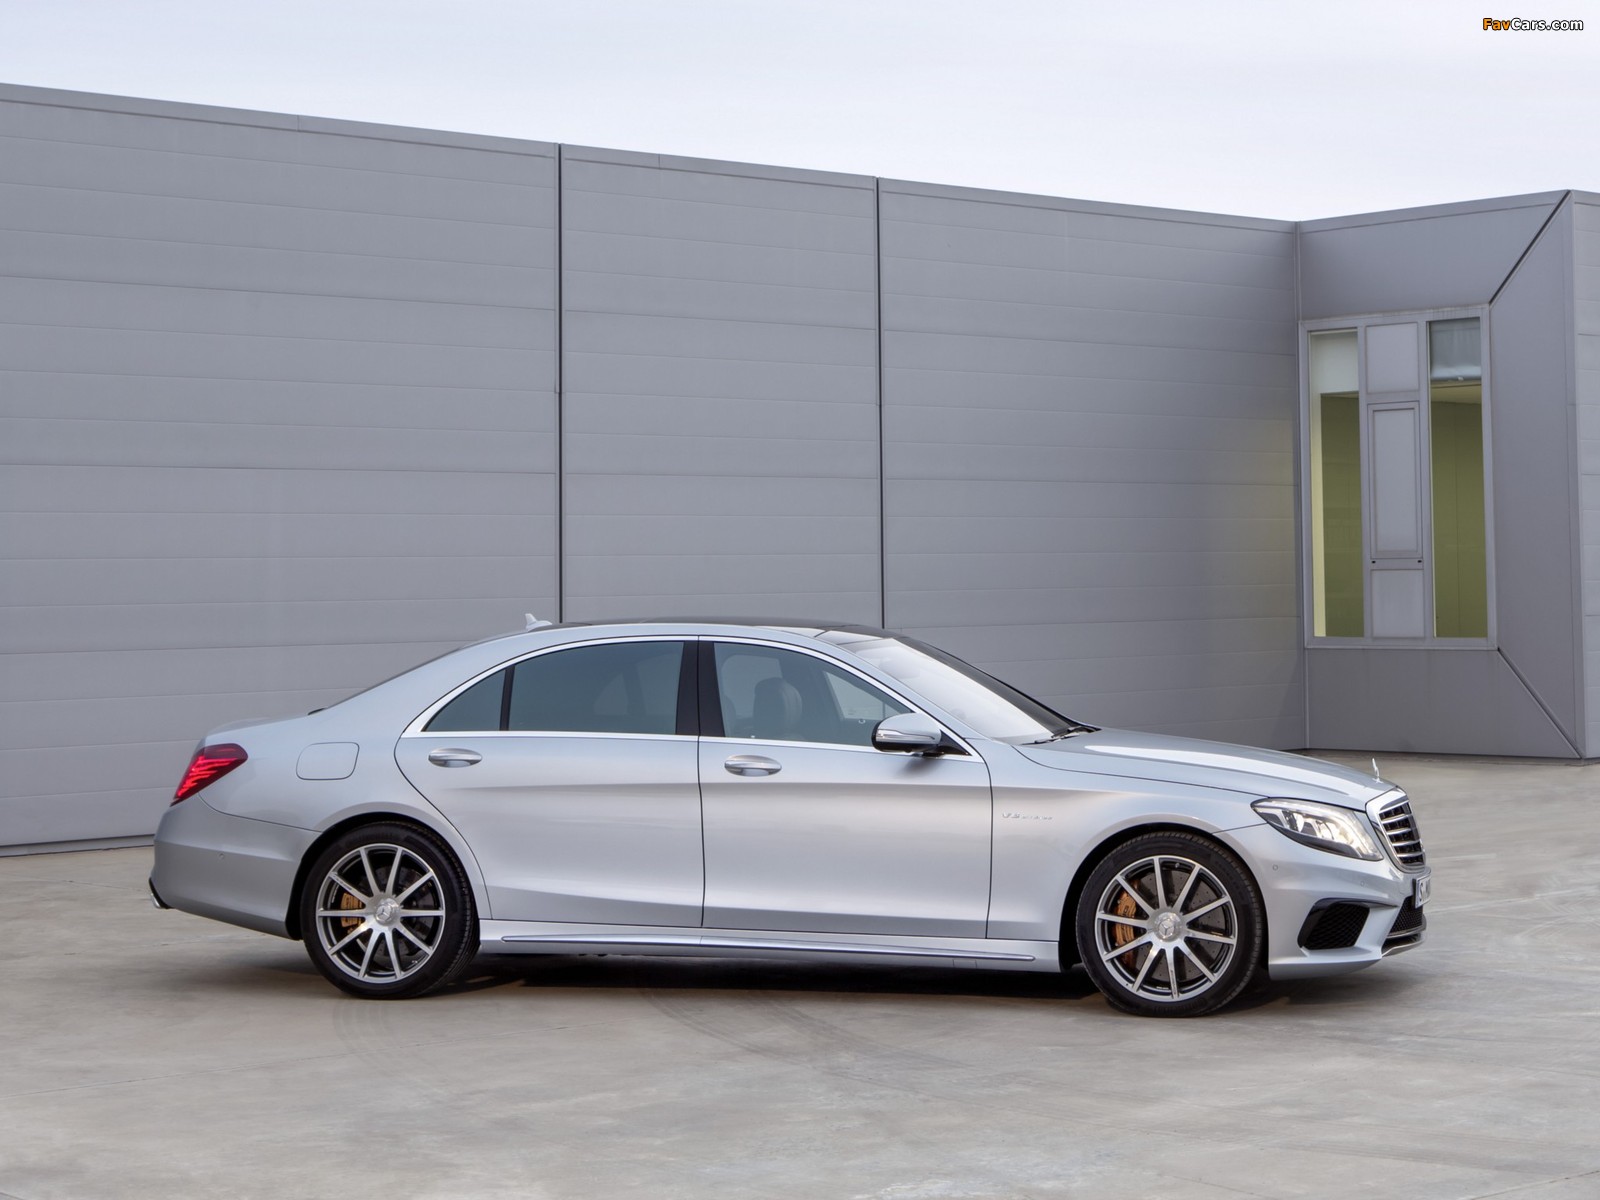 Mercedes-Benz S 63 AMG (W222) 2013 wallpapers (1600 x 1200)